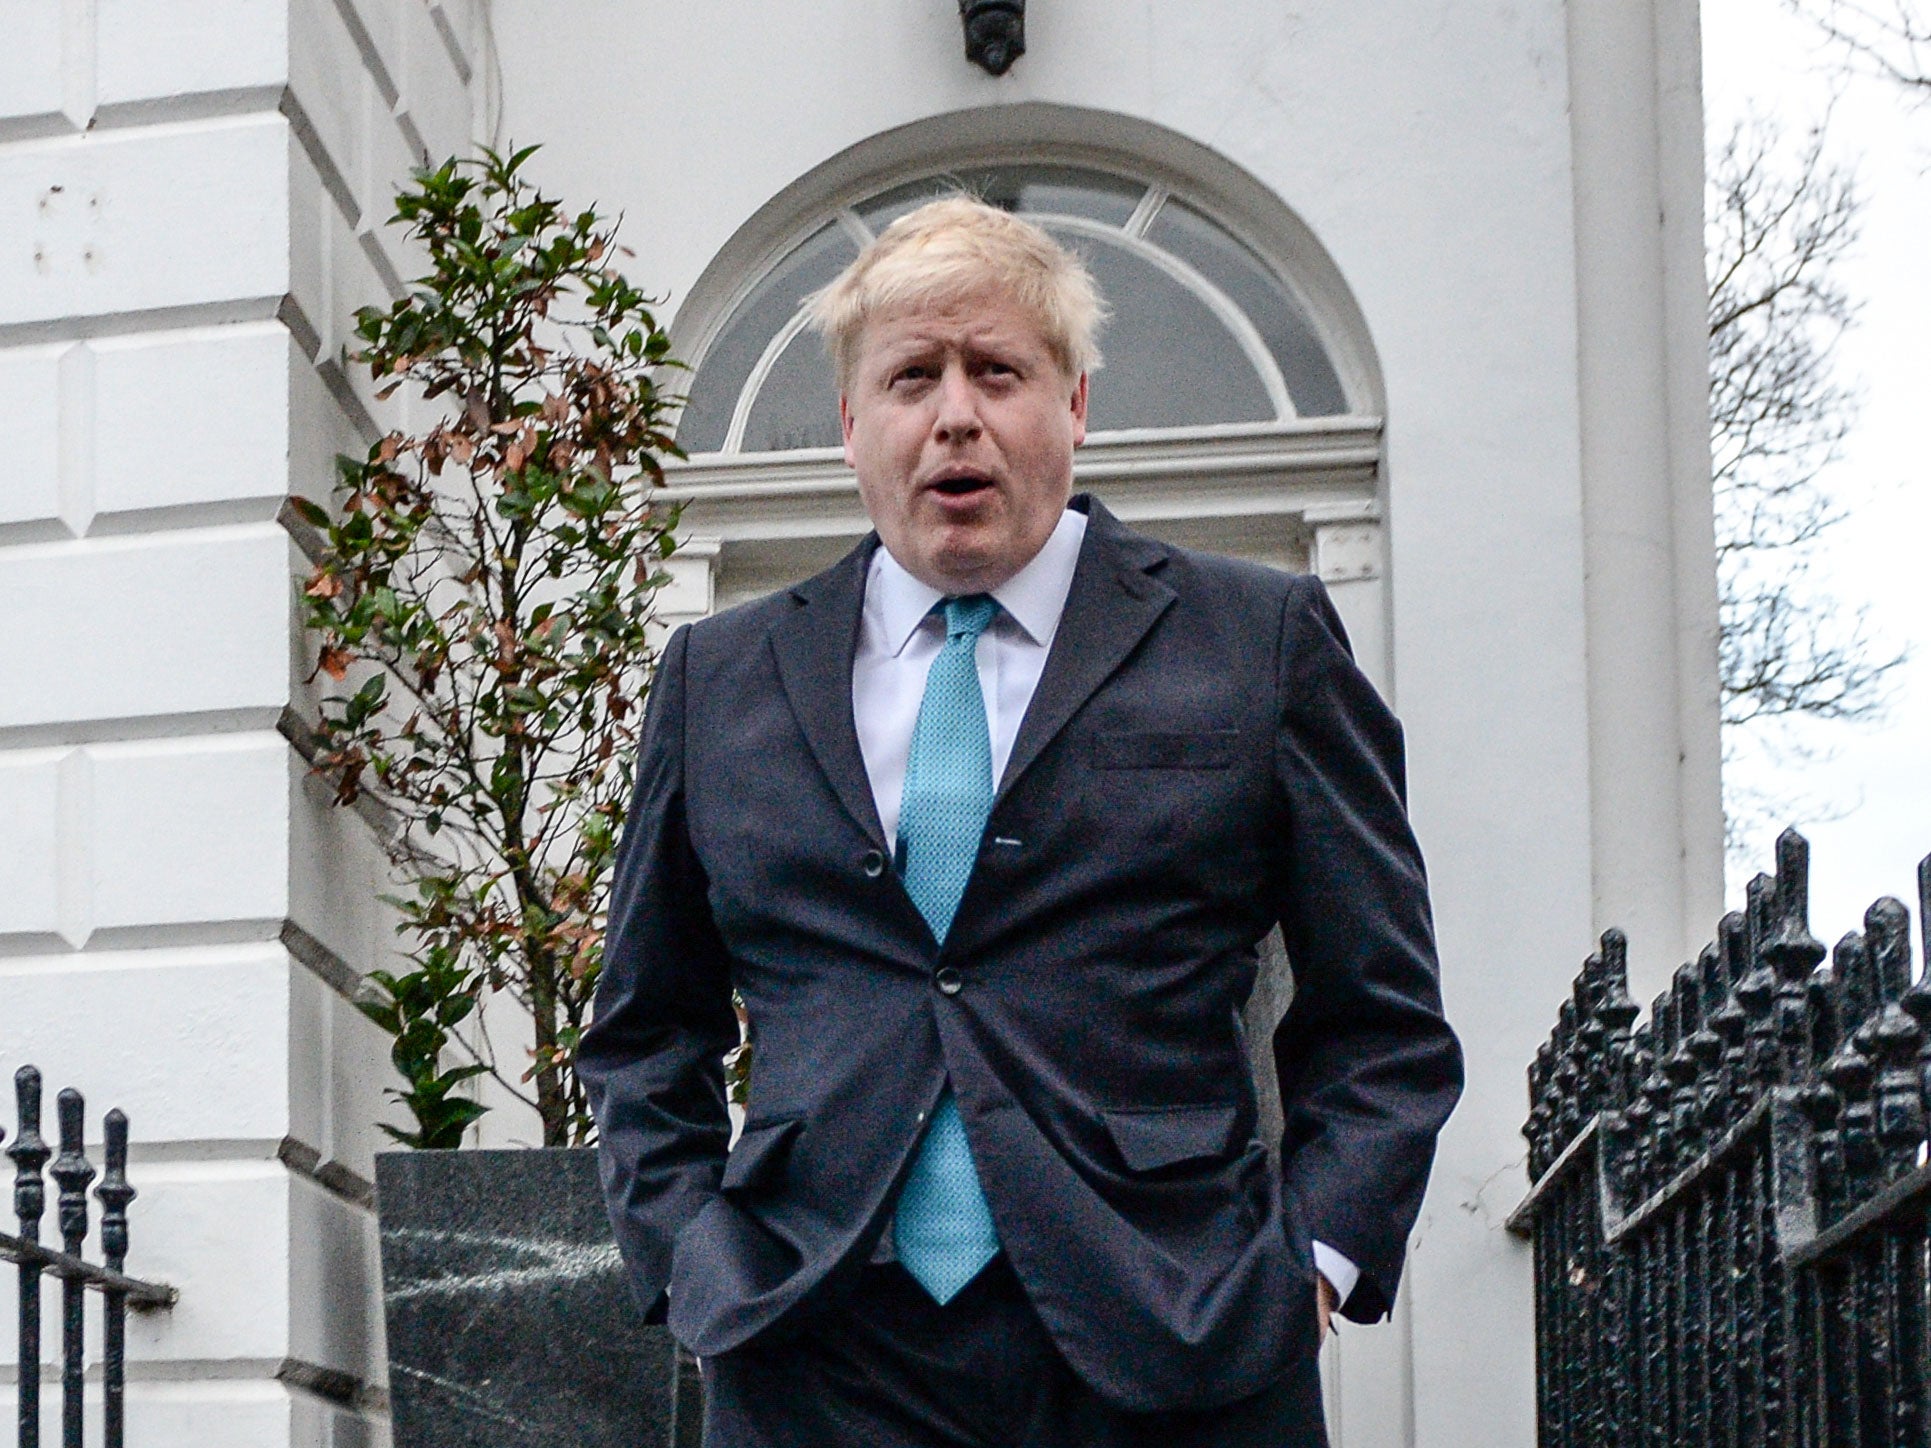 Boris Johnson has announced his support for the Leave campaign